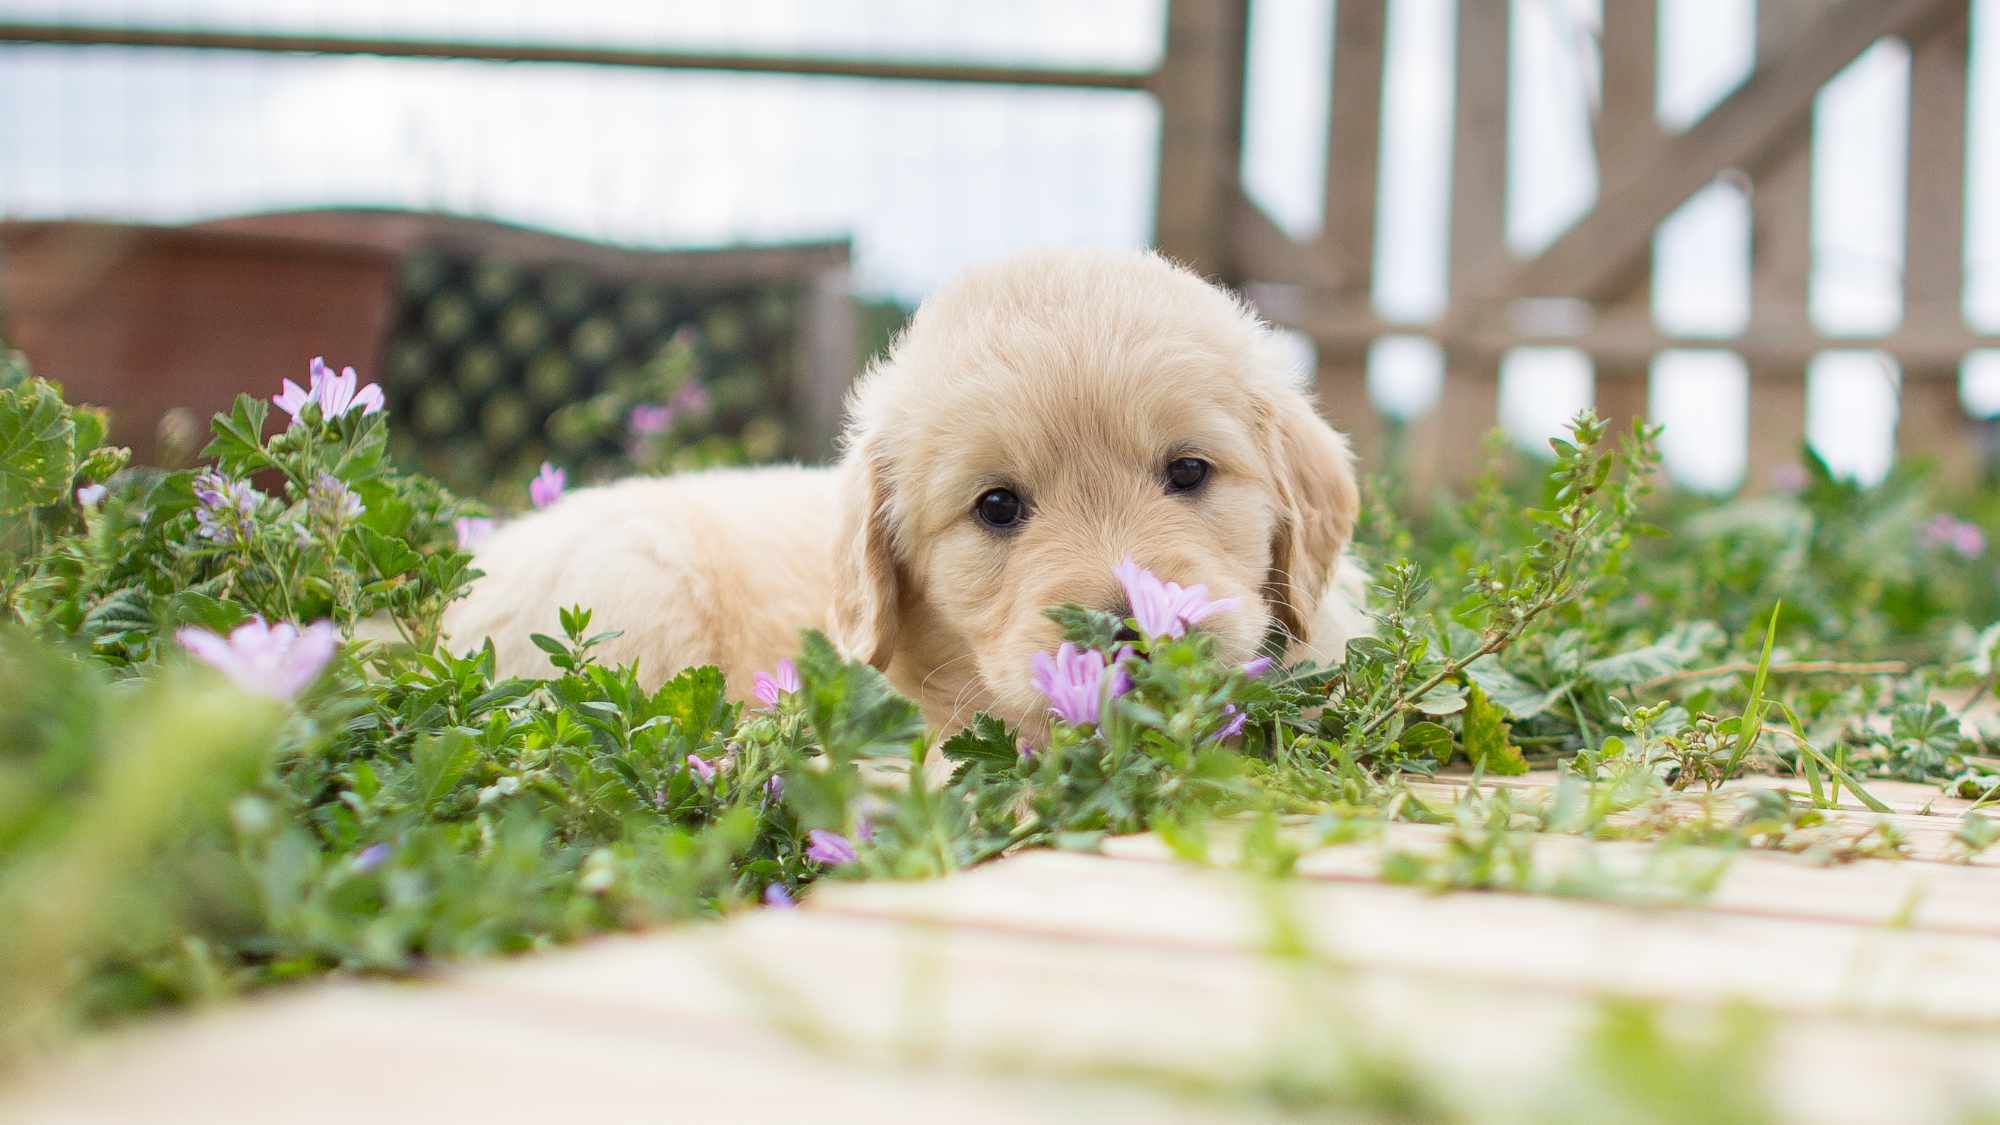 Puppy in the grass